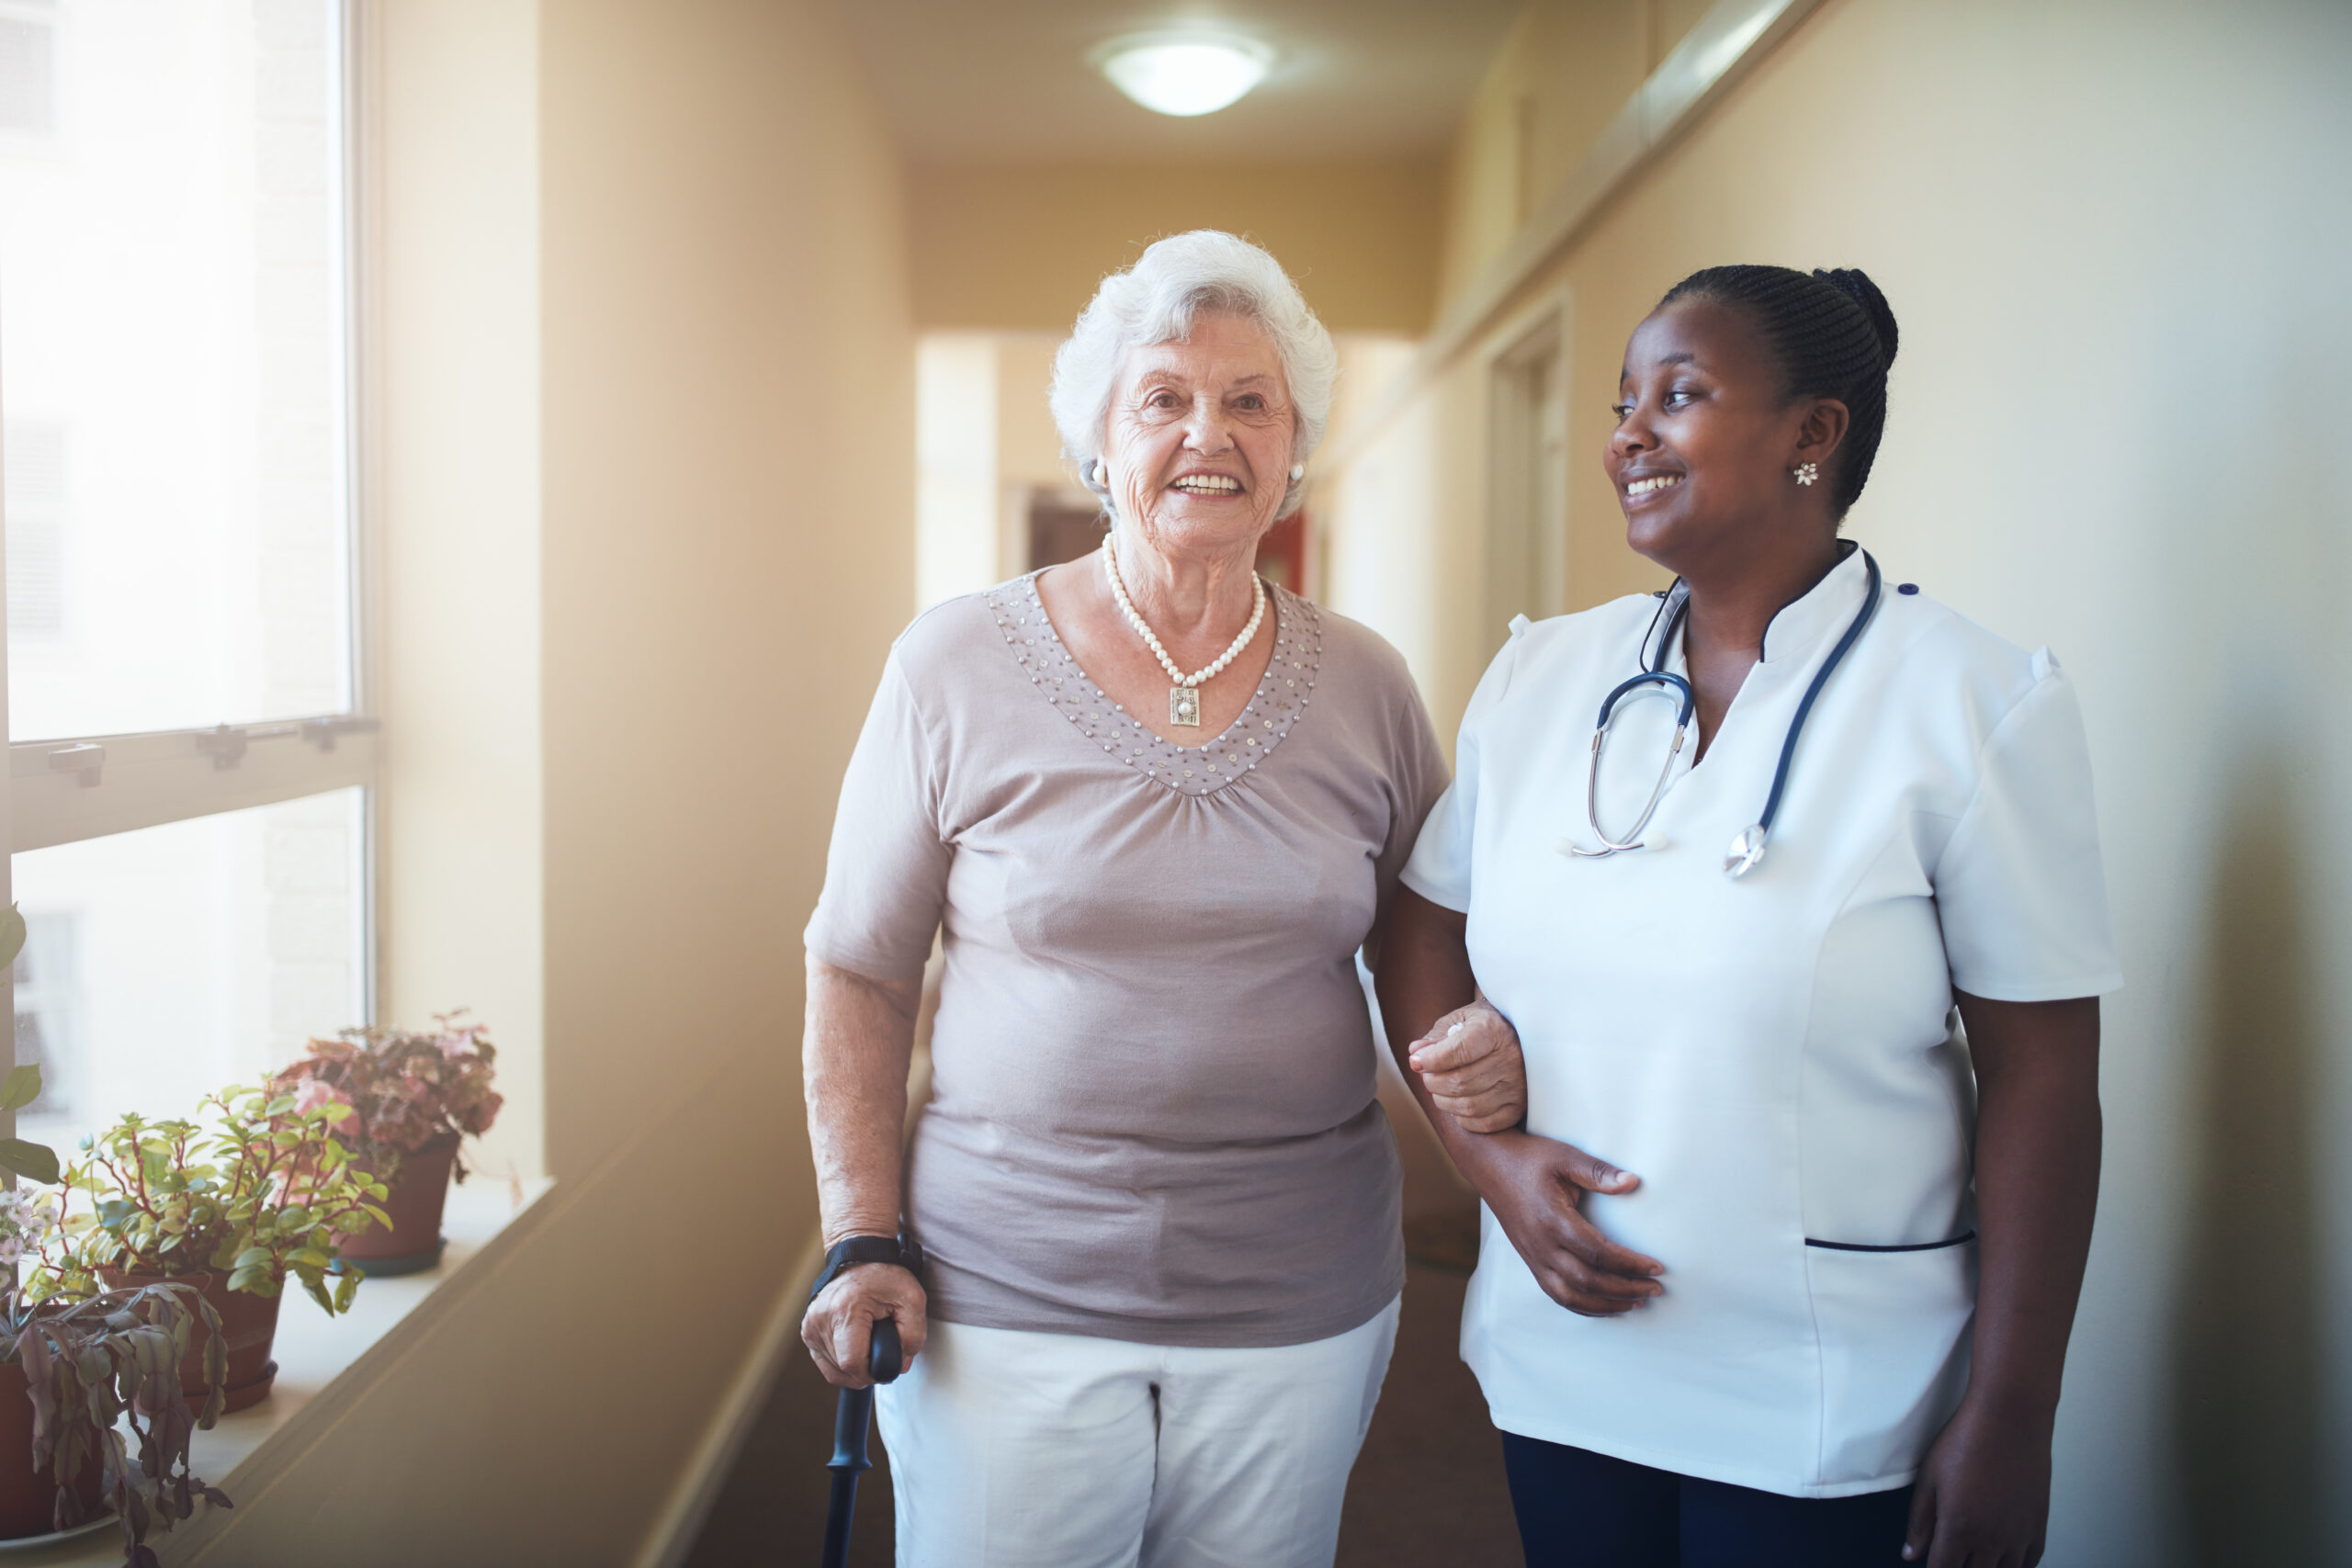 Happy healthcare worker and senior woman together at nursing home. Caring female doctor assisting a senior patient to walk.